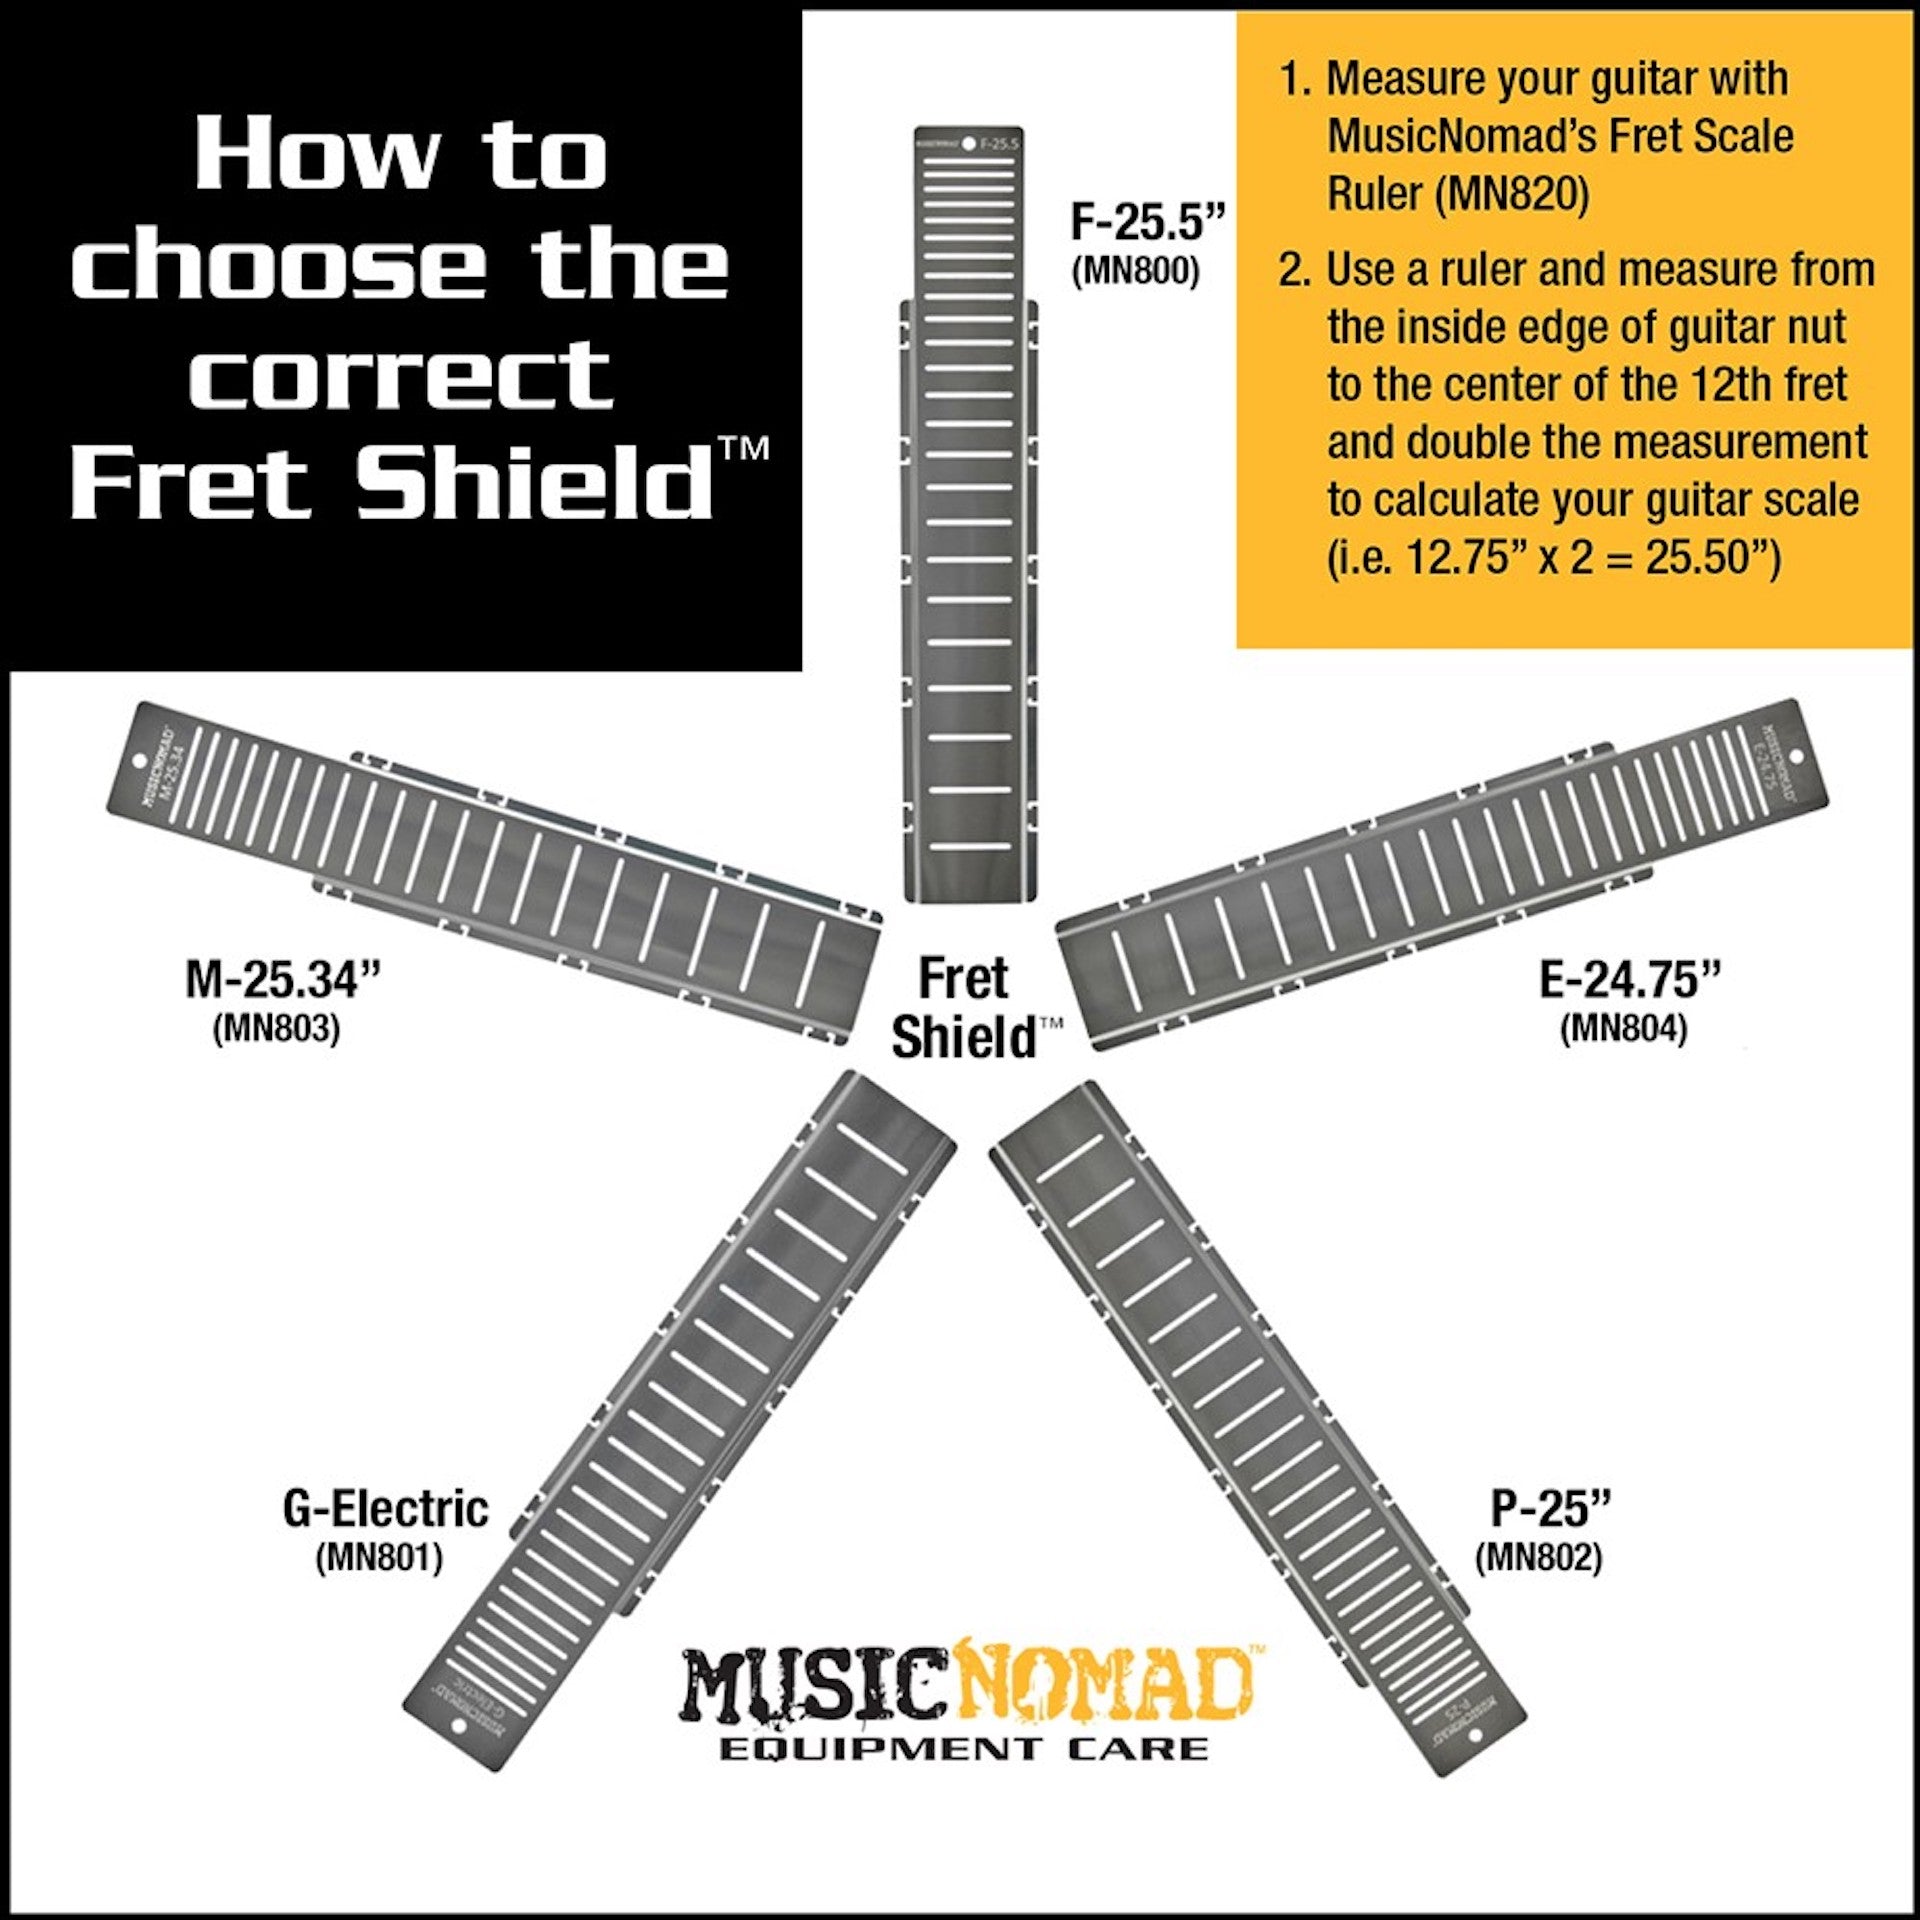 MusicNomad Fret Shield™ - Total Fretboard Protector Guard Tool for Fret Polishing on Gibson Electric Guitars (MN801) - HIENDGUITAR   musicnomad musicnomad